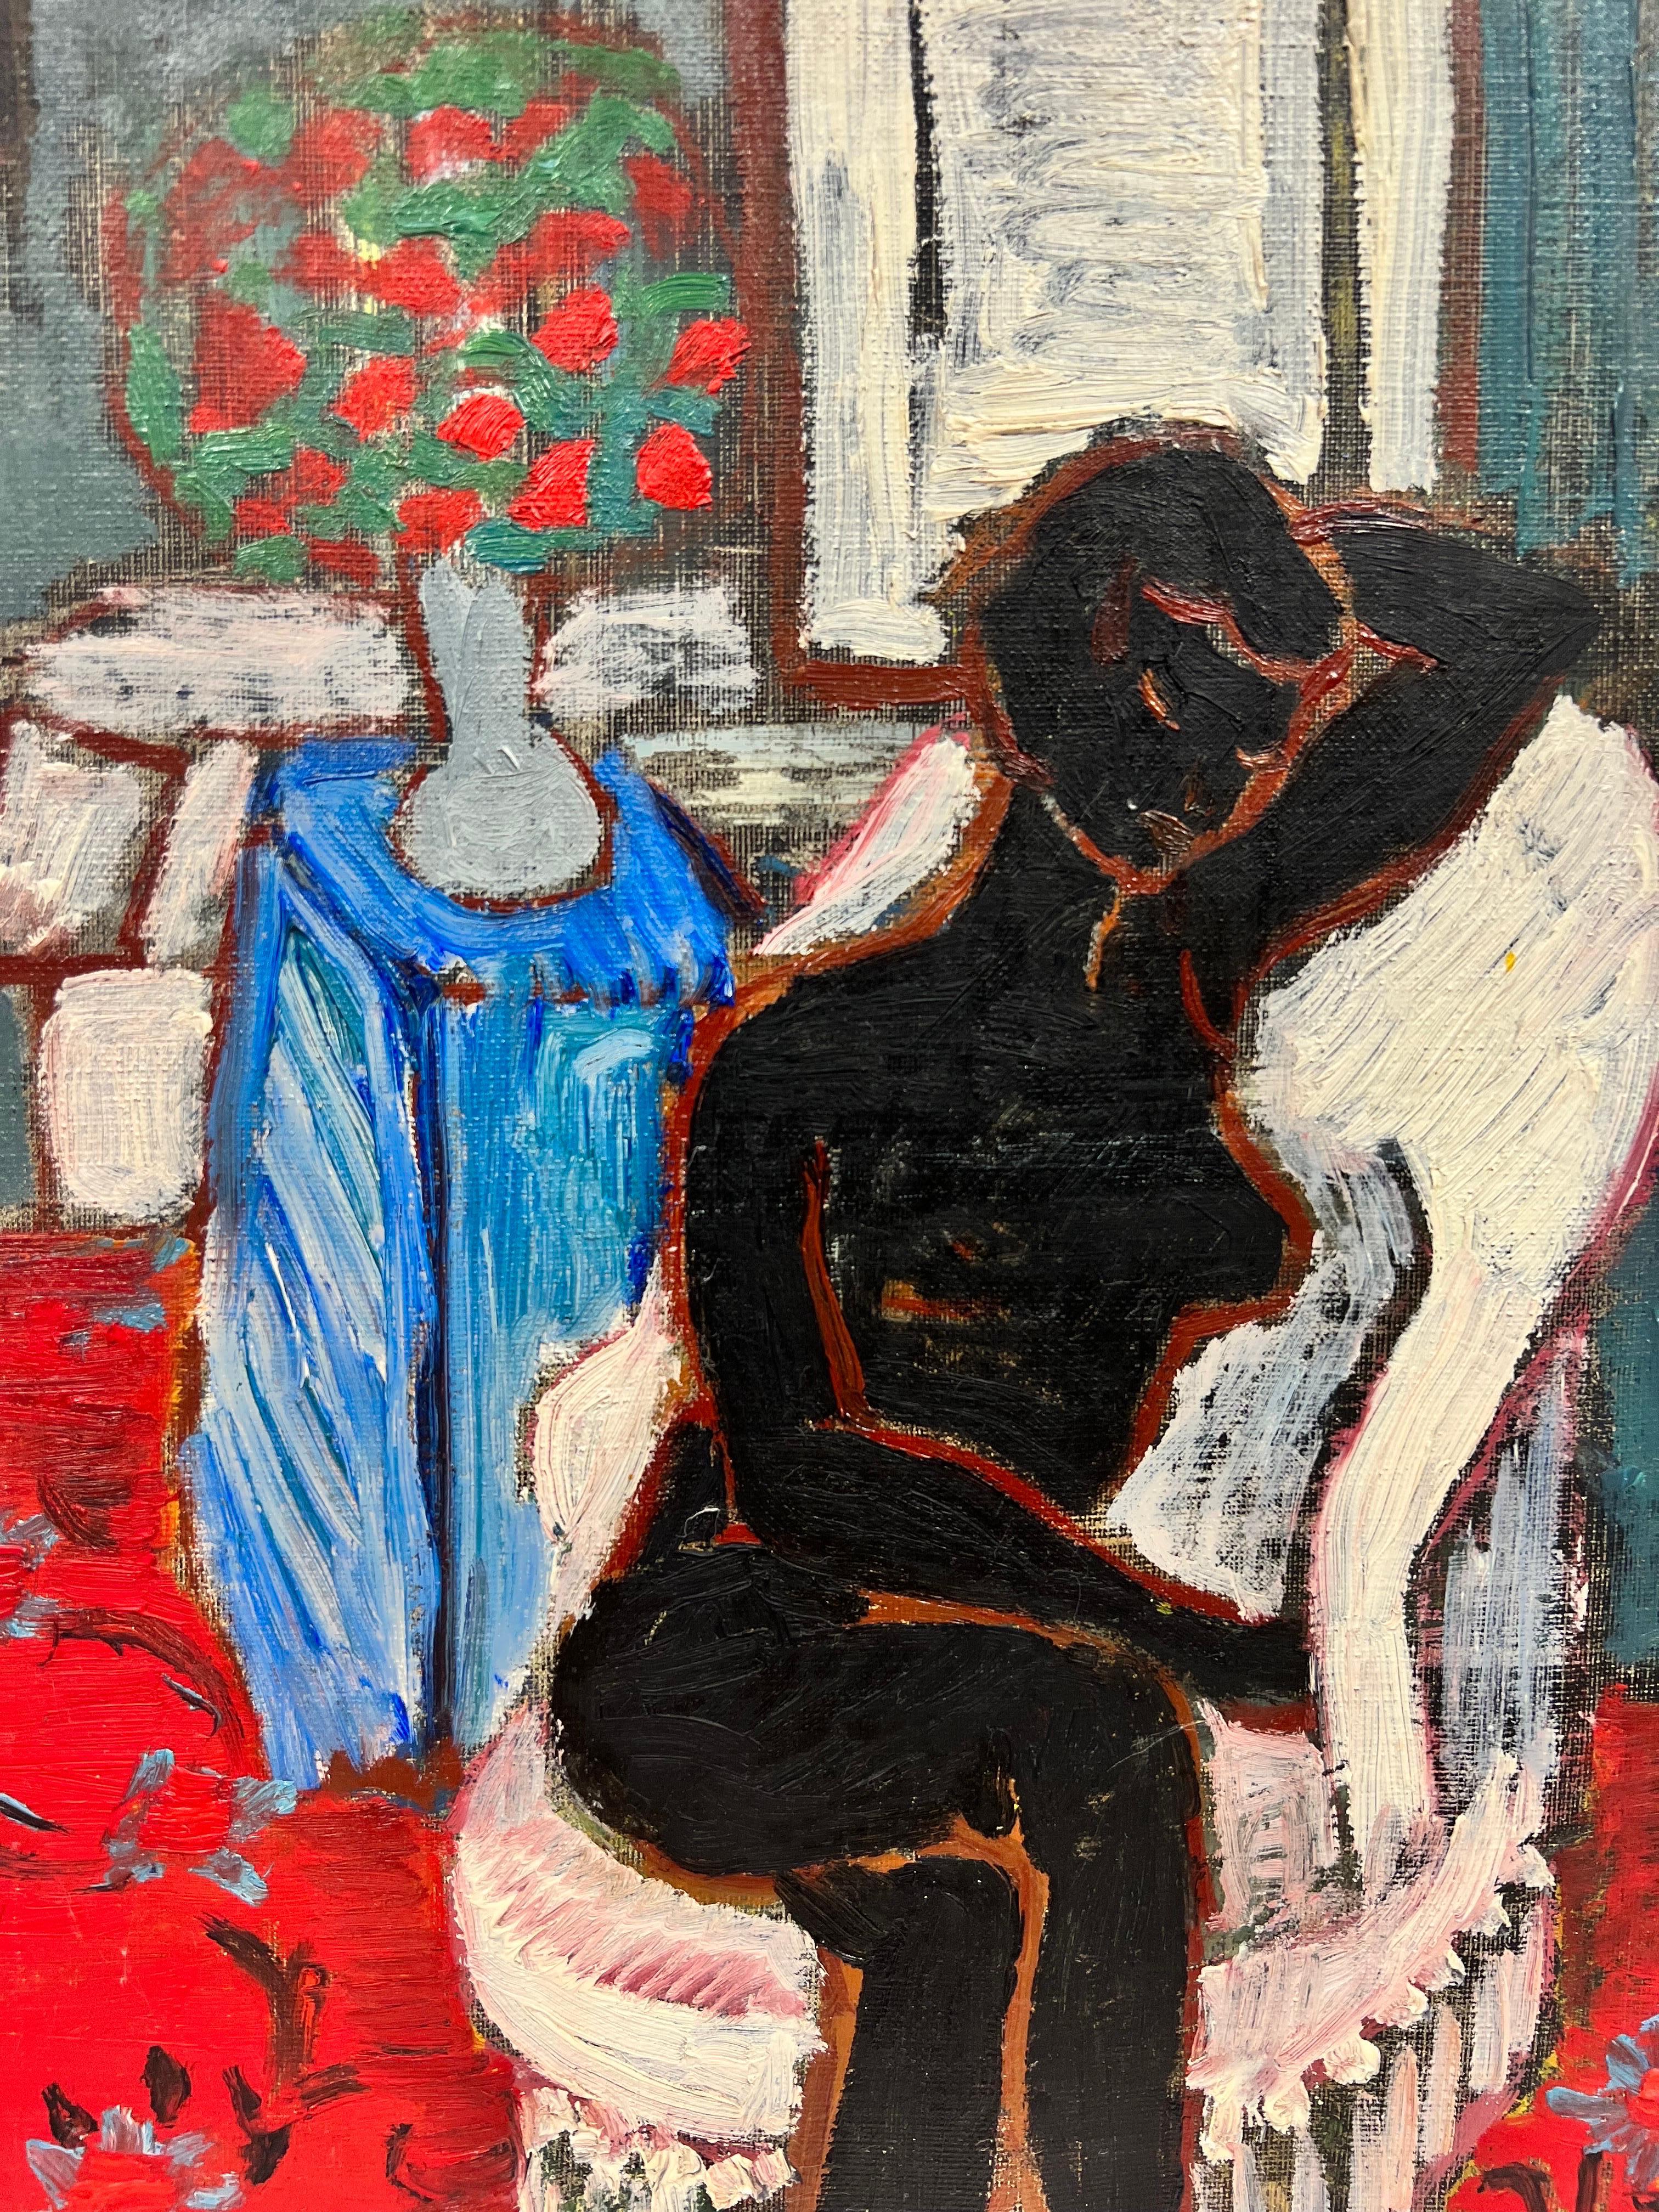 Artist/ School: French Modernist School, mid 20th century, signed lower left

Title: Nude seated within an interior setting. 

Medium: oil on canvas, unframed

Painting: 18 x 15 inches

Provenance: private collection, France

Condition: The painting